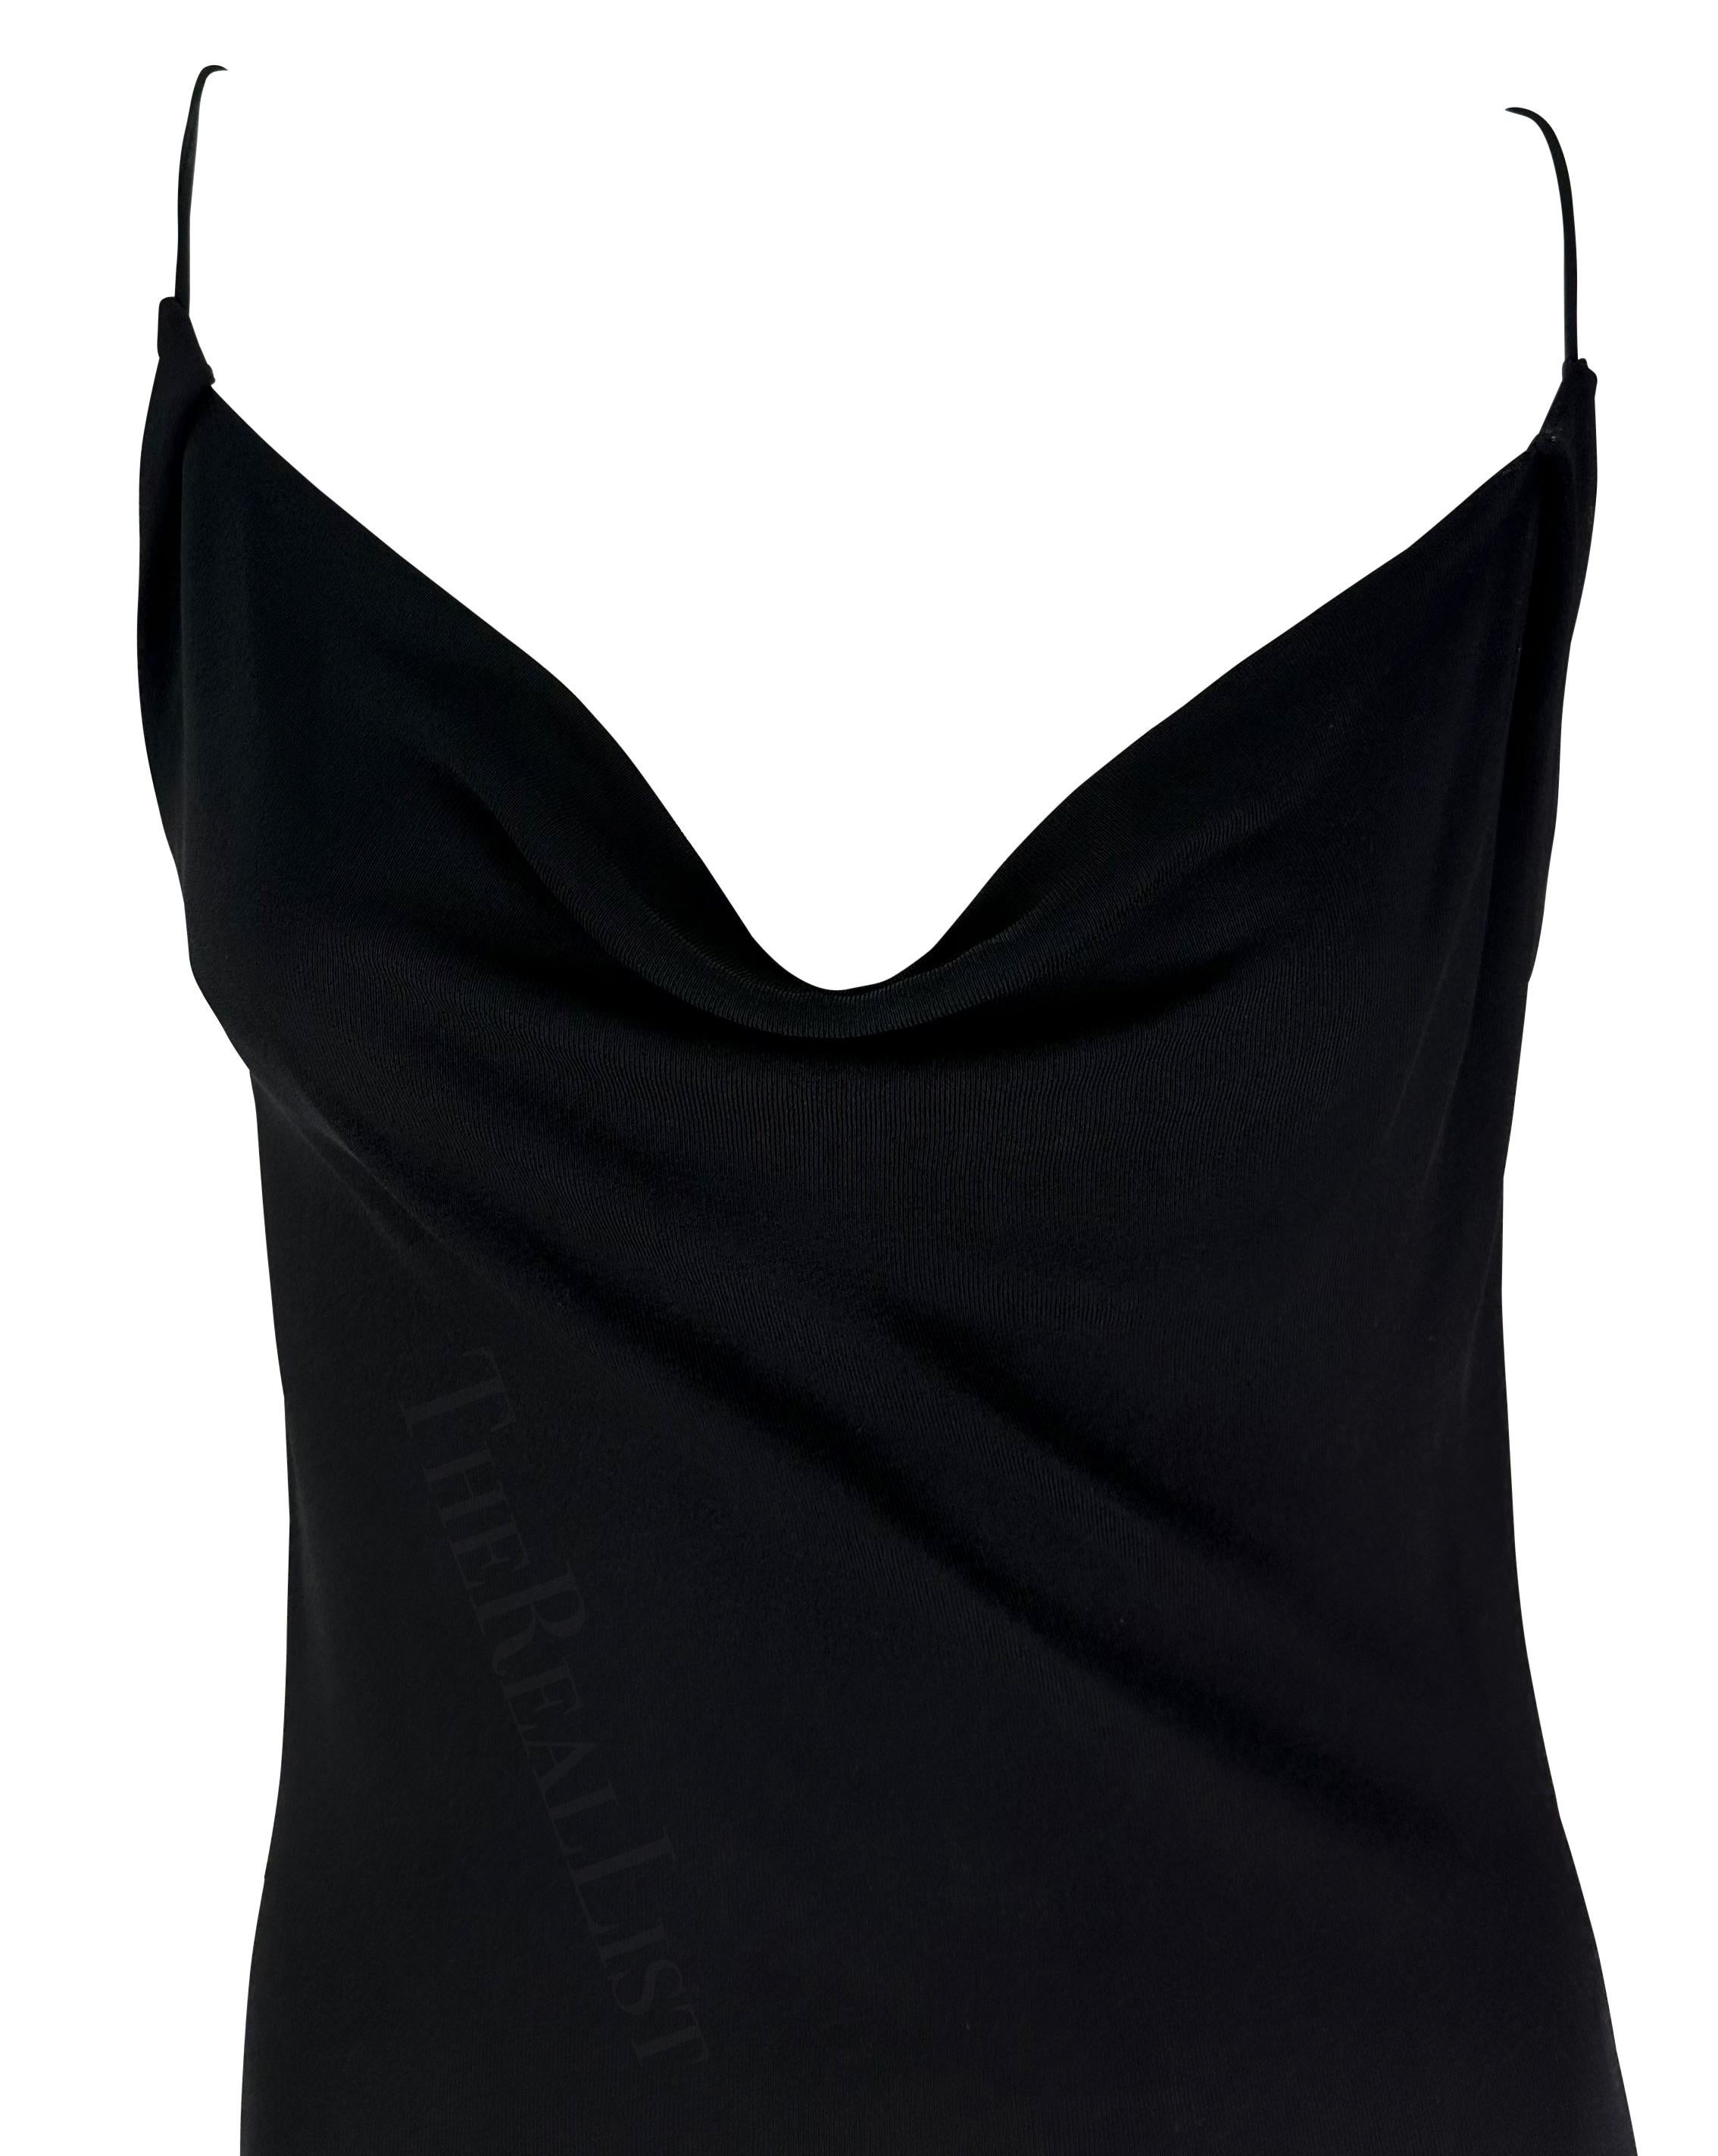 S/S 1997 Gucci by Tom Ford Plunging Cowl Black Slip Bodycon Gown  In Excellent Condition For Sale In West Hollywood, CA